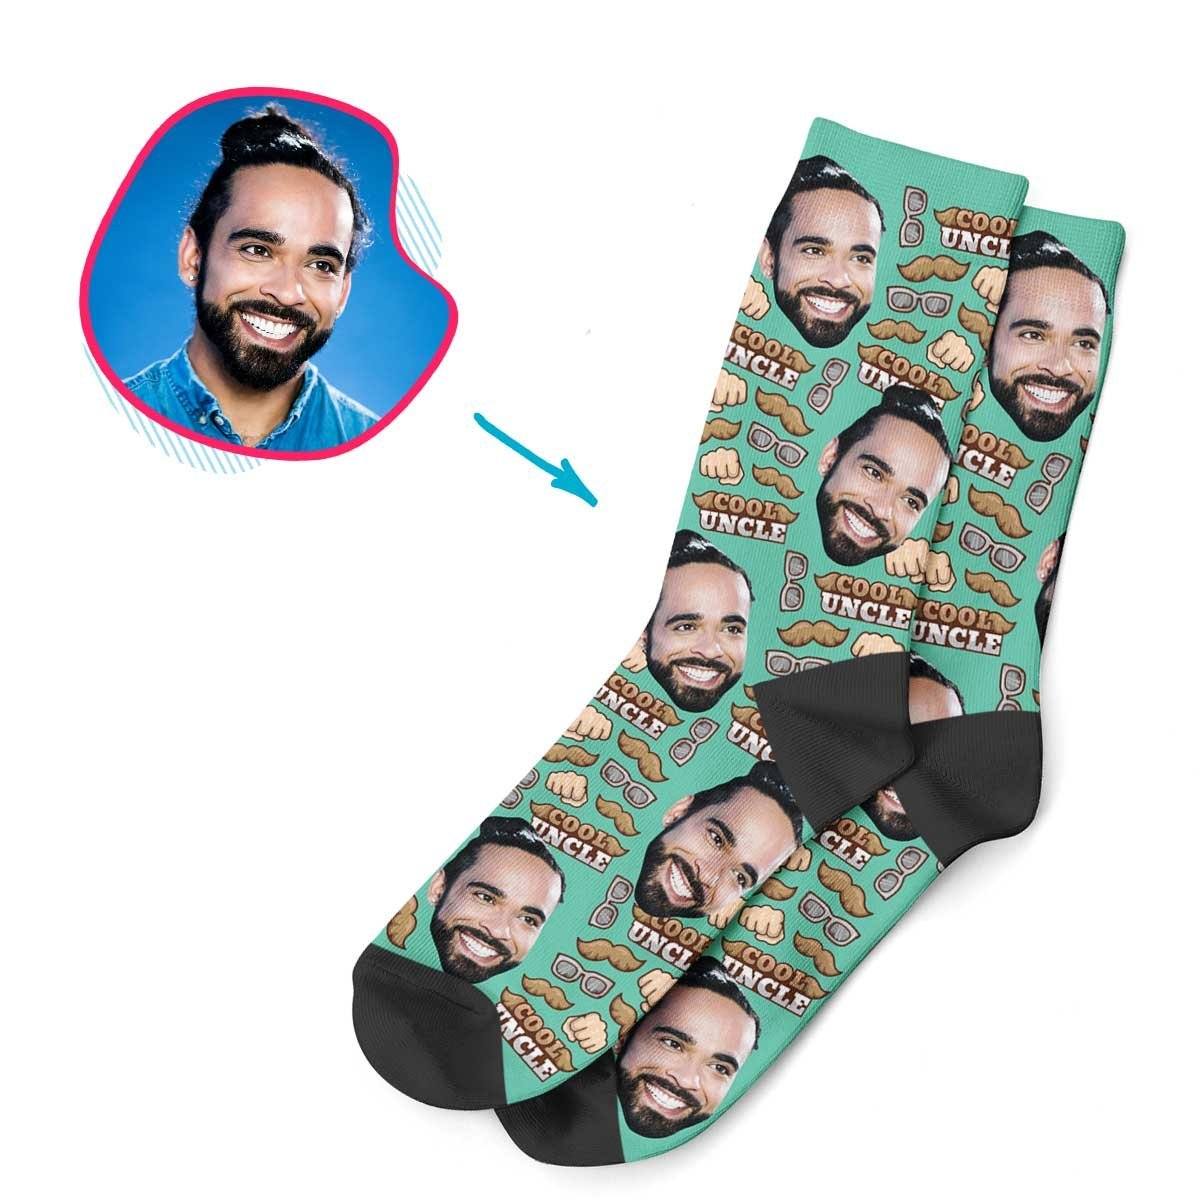 Mint Uncle personalized socks with photo of face printed on them